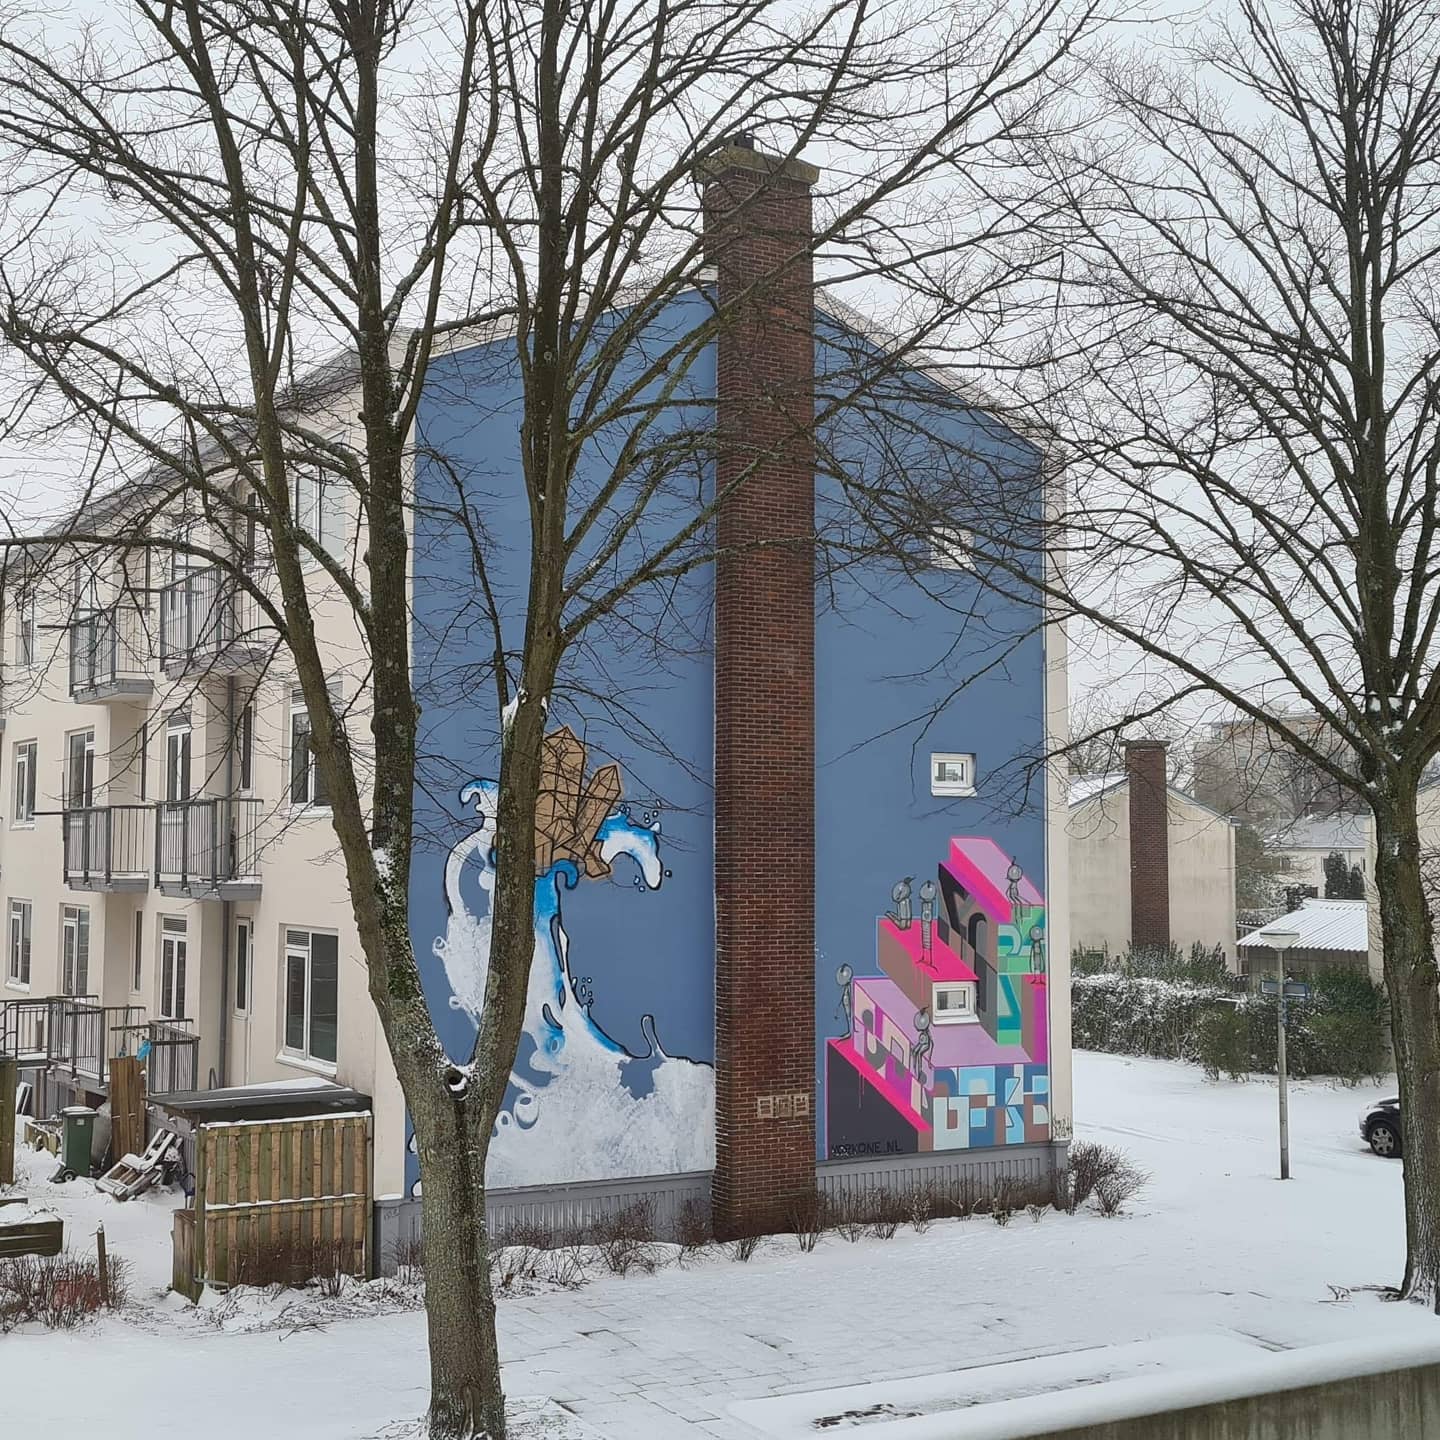 Today I was going to finish another Mural in Delft, but Mother Nature thought otherwise haha! This snowy picture was sent to me this morning by one of the neighbours First time working this big, really fun to do and so much to learn! Also very nice to meet and work alongside a few other muralists Thank you again @michadebie and @openartgallerydelft for involving me in this! ????#streetart #mural #bomenwijkdelft #oefenenoefenenoefenen #snowstorm #pasteart #wheatpasteart